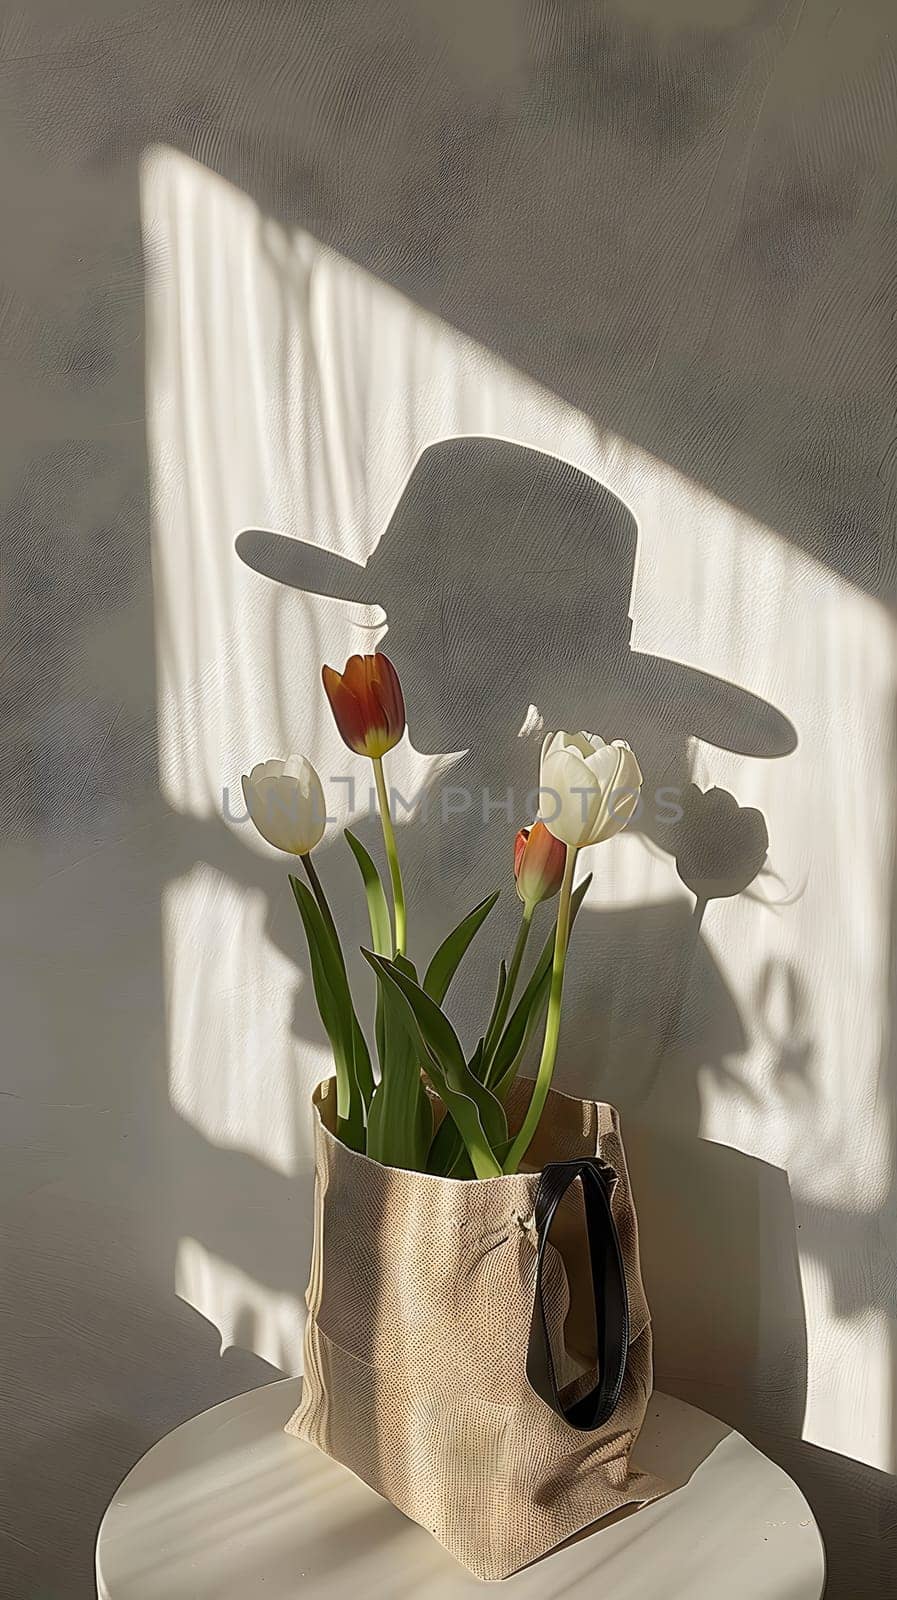 A flowerfilled vase sits on a table, casting a shadow of a hat. The arrangement adds a touch of beauty to the room in a blend of nature and artifice